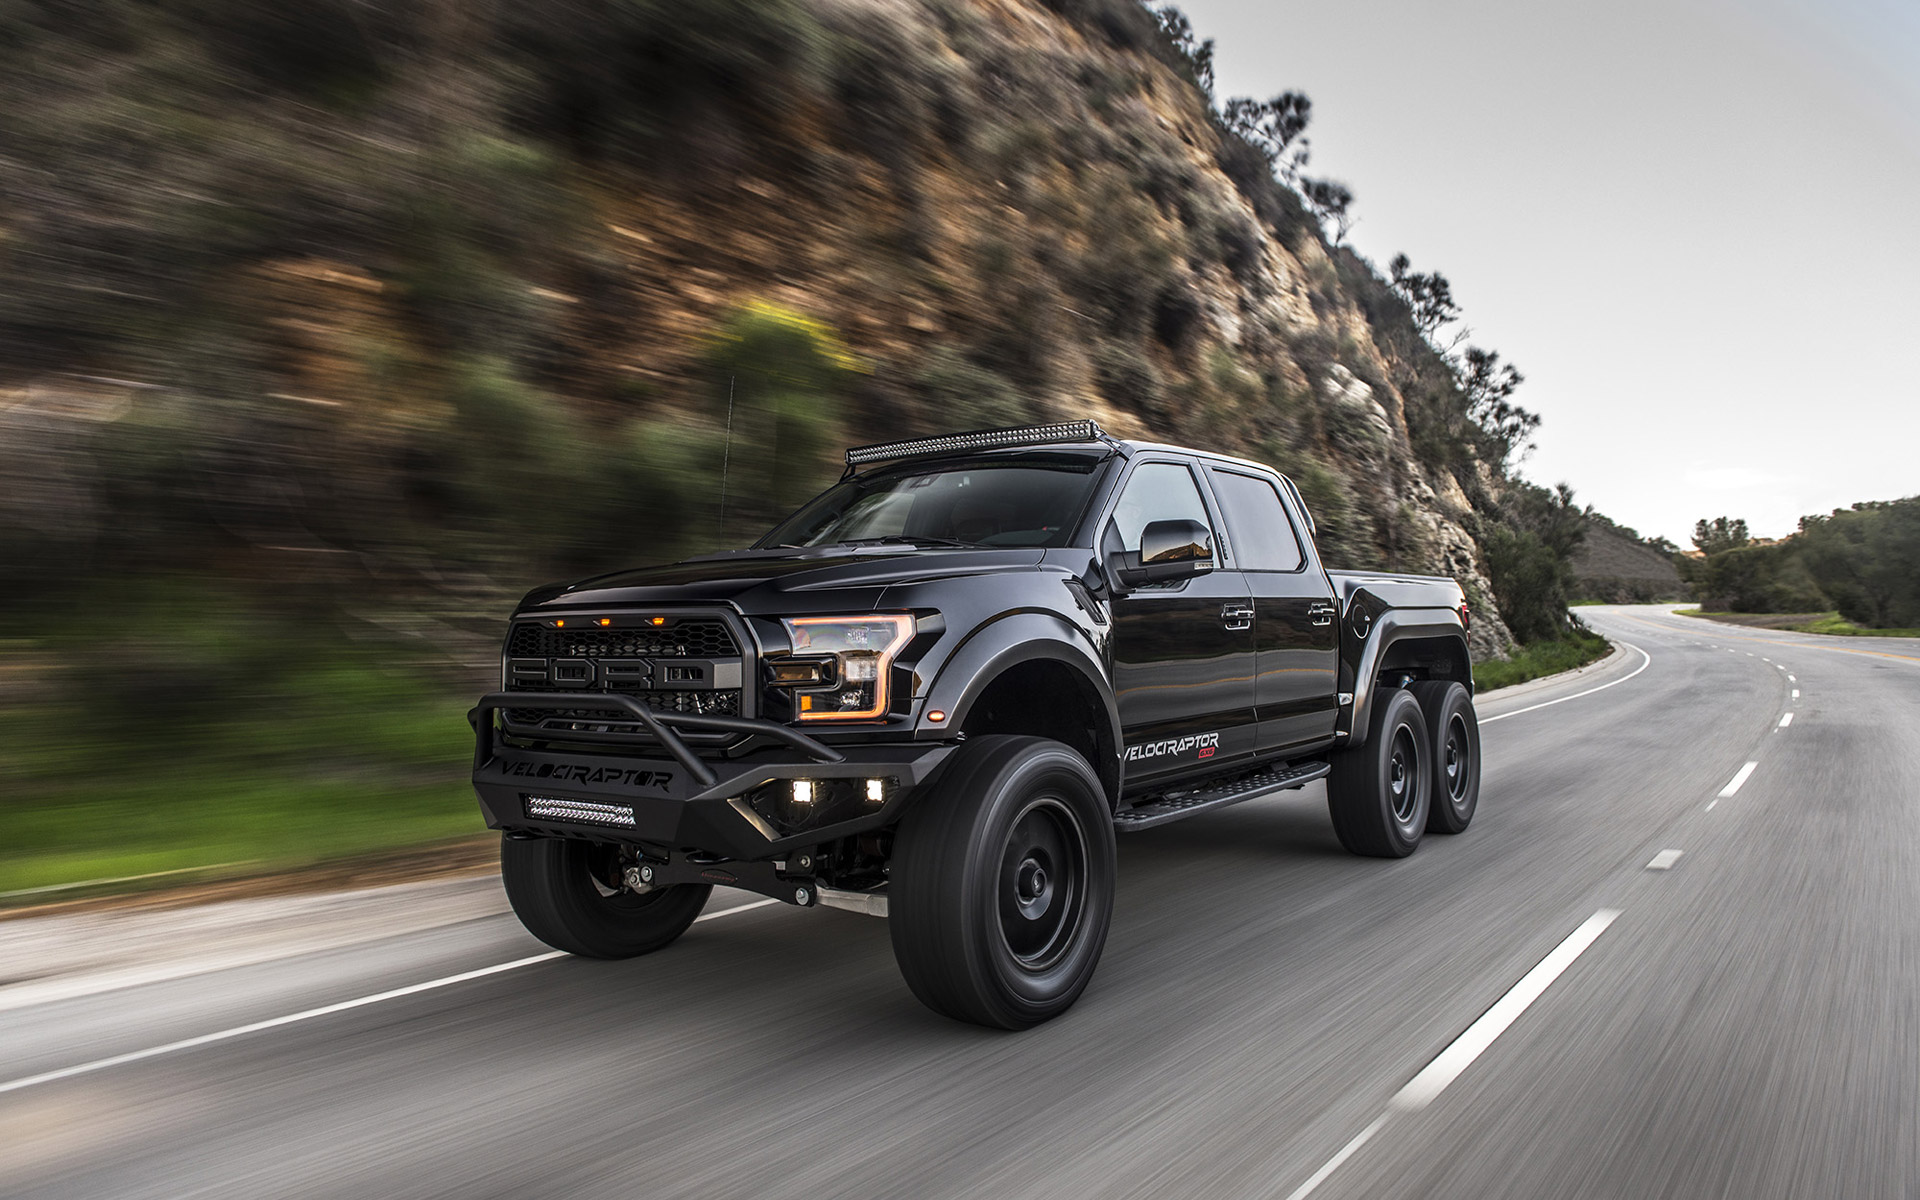 Download Wallpaper Hennessey VelociRaptor 6x Ford Raptor F 150 6x Front View, Tuning F American Cars, Ford For Desktop With Resolution 1920x1200. High Quality HD Picture Wallpaper